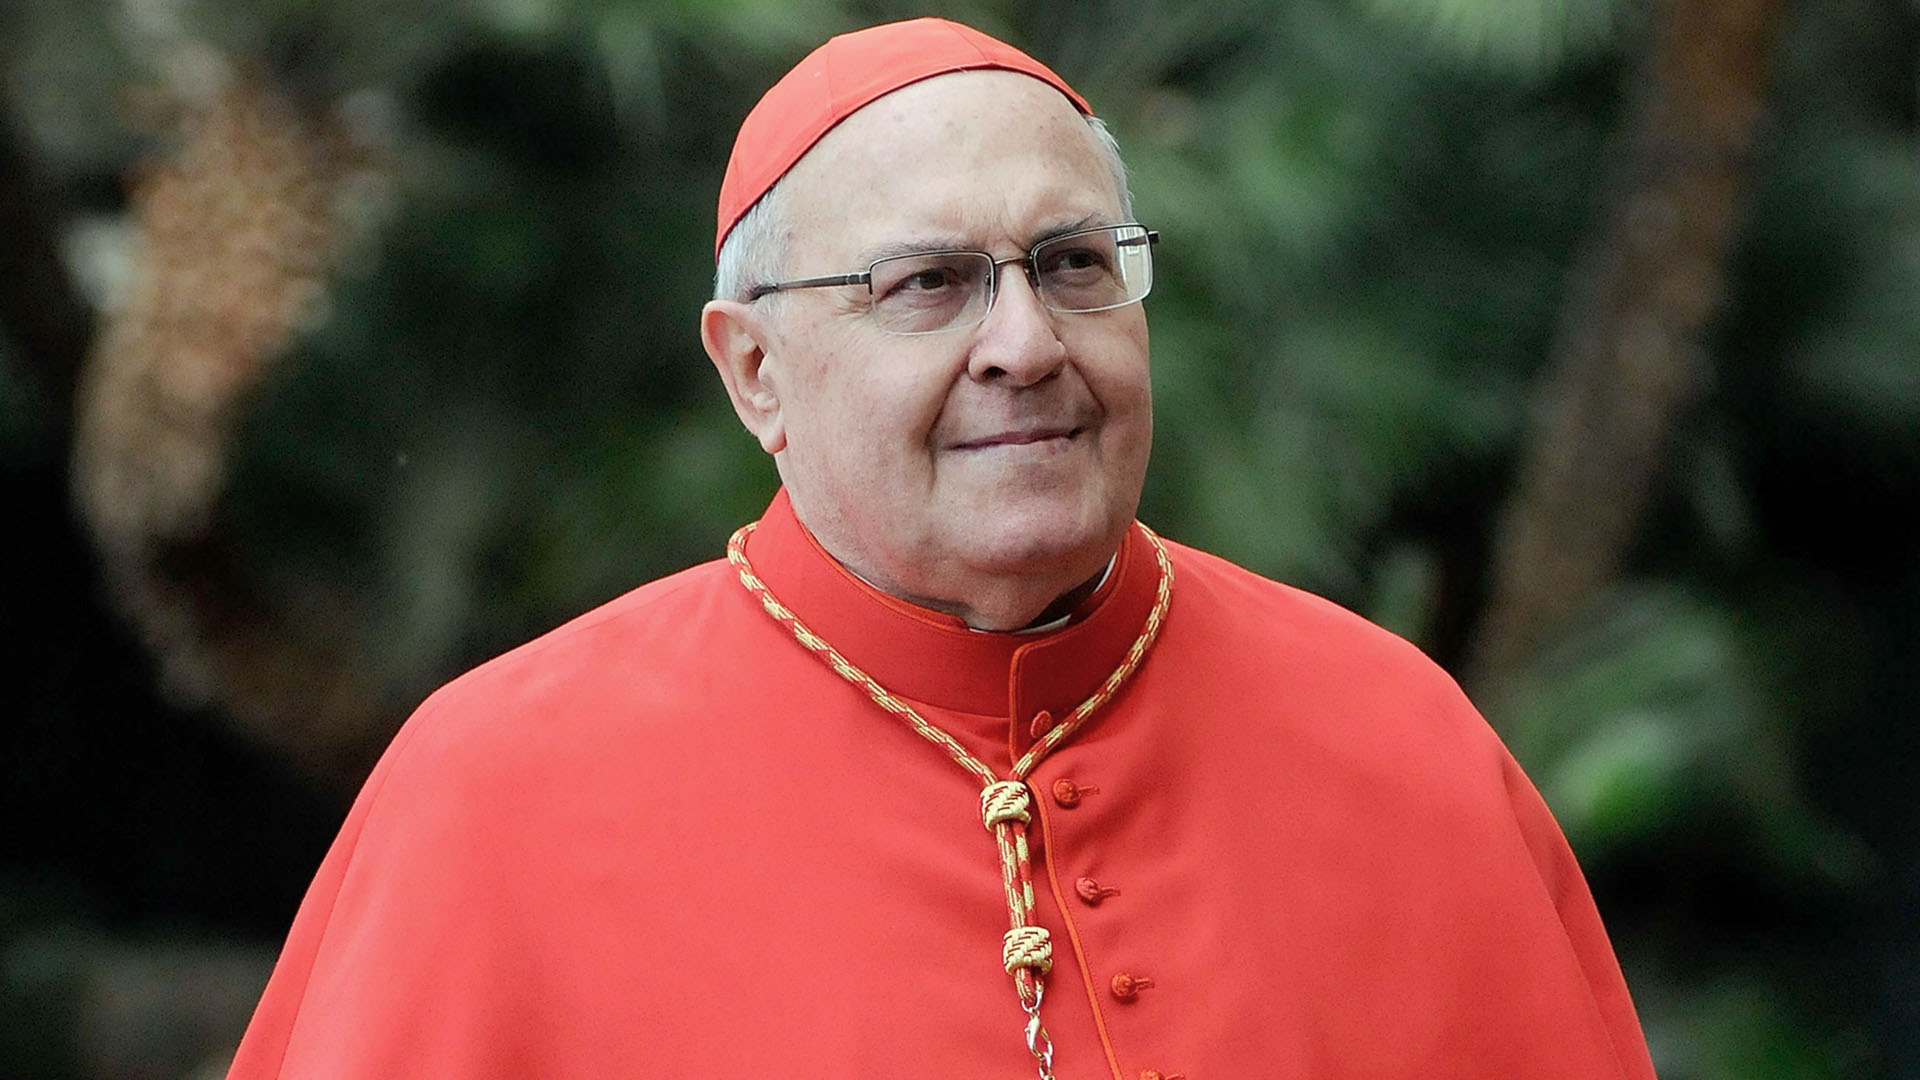 Italian Cardinal Angelo Sodano visits the Basilica of Santa Sabina on March 5, 2014 in Rome, Italy to attend the Ash Wednesday service led by Pope Francis.  (Photo by Vatican Pool / Getty Images)